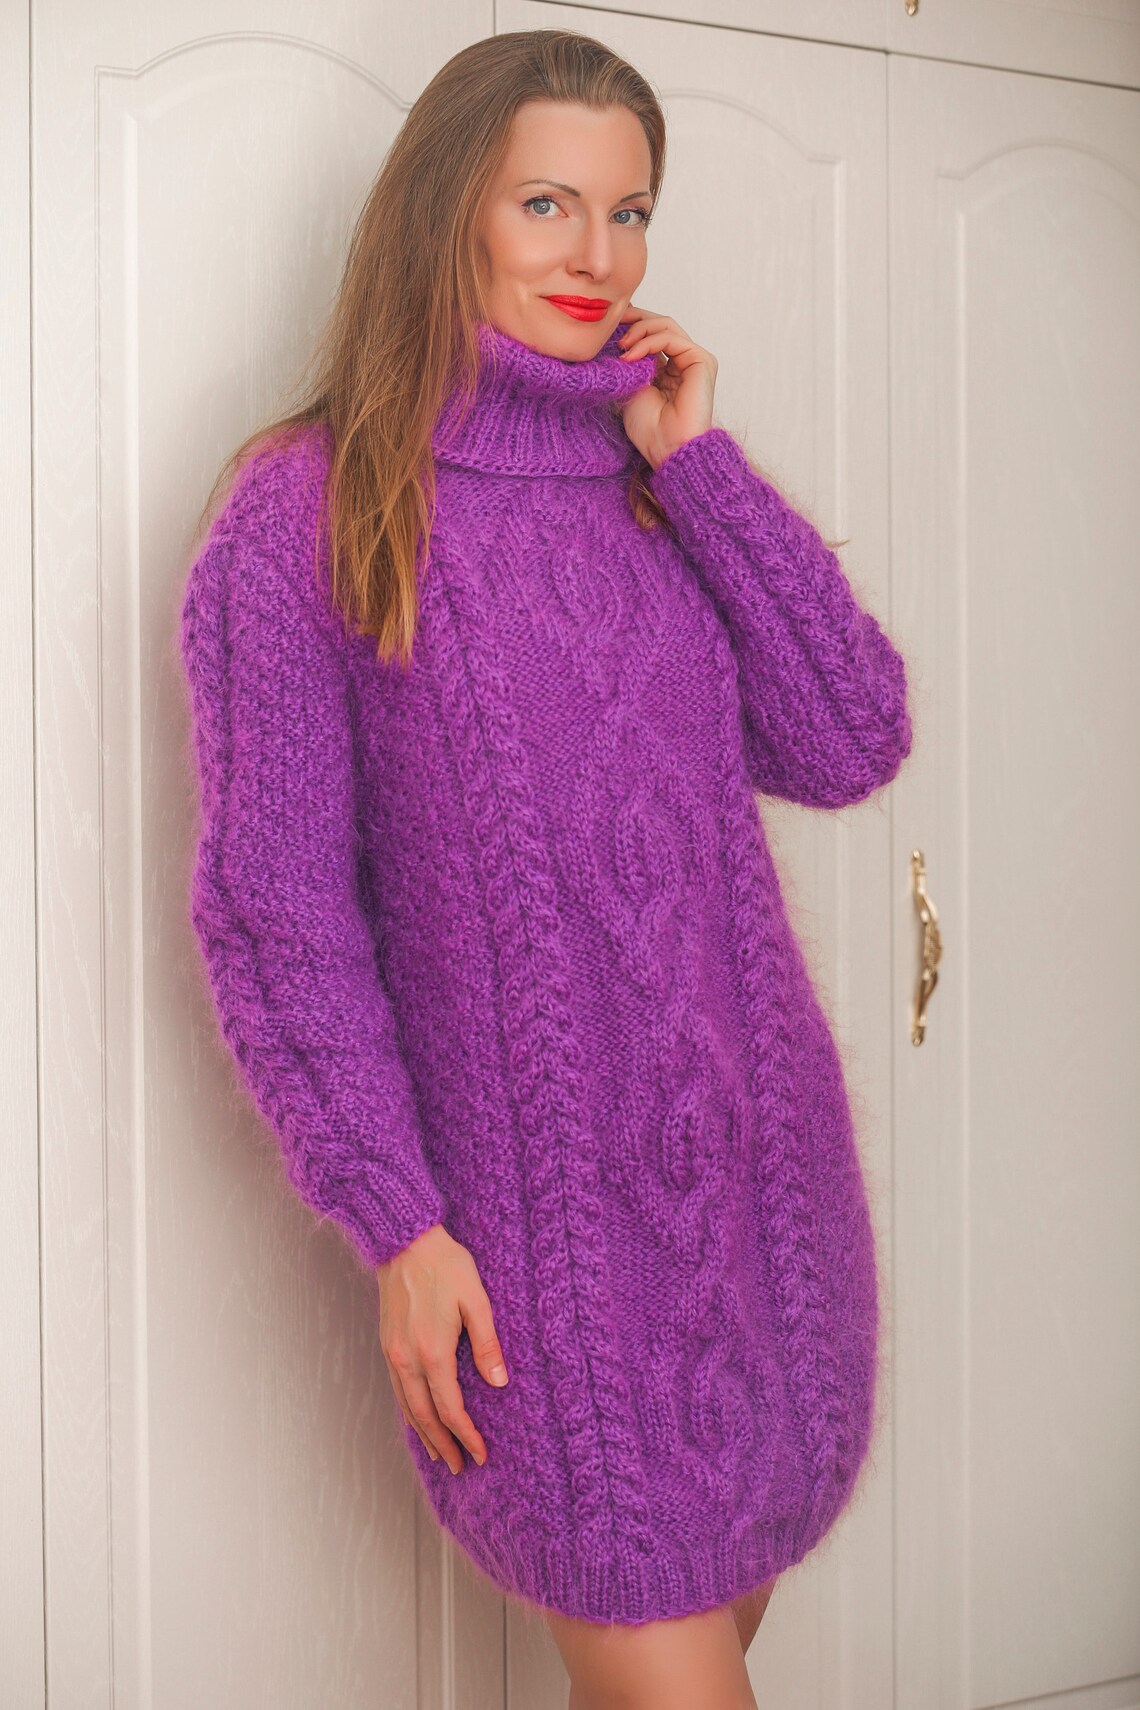 Sexy Mohair Dress Hand Knitted Tunic Cable Knit Unique Sweater - Etsy UK